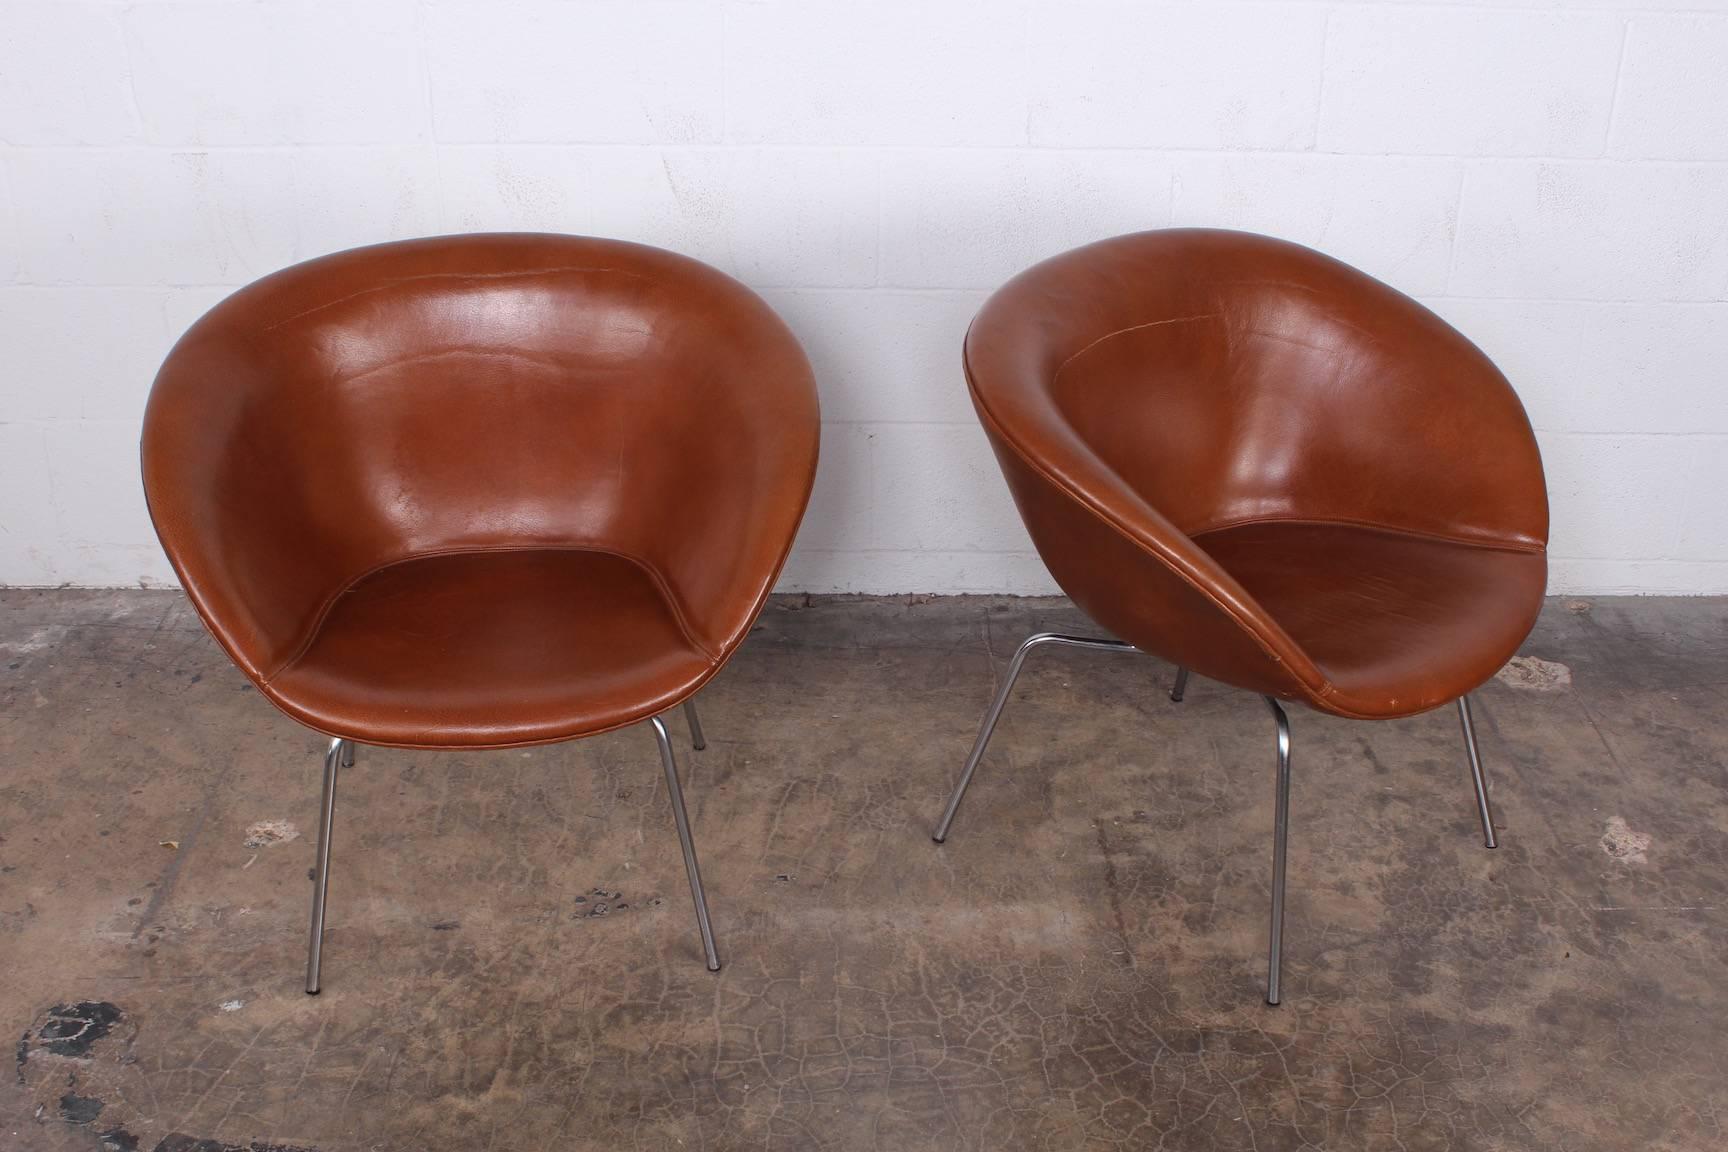 Mid-20th Century Arne Jacobsen Pot Chairs in Original Leather